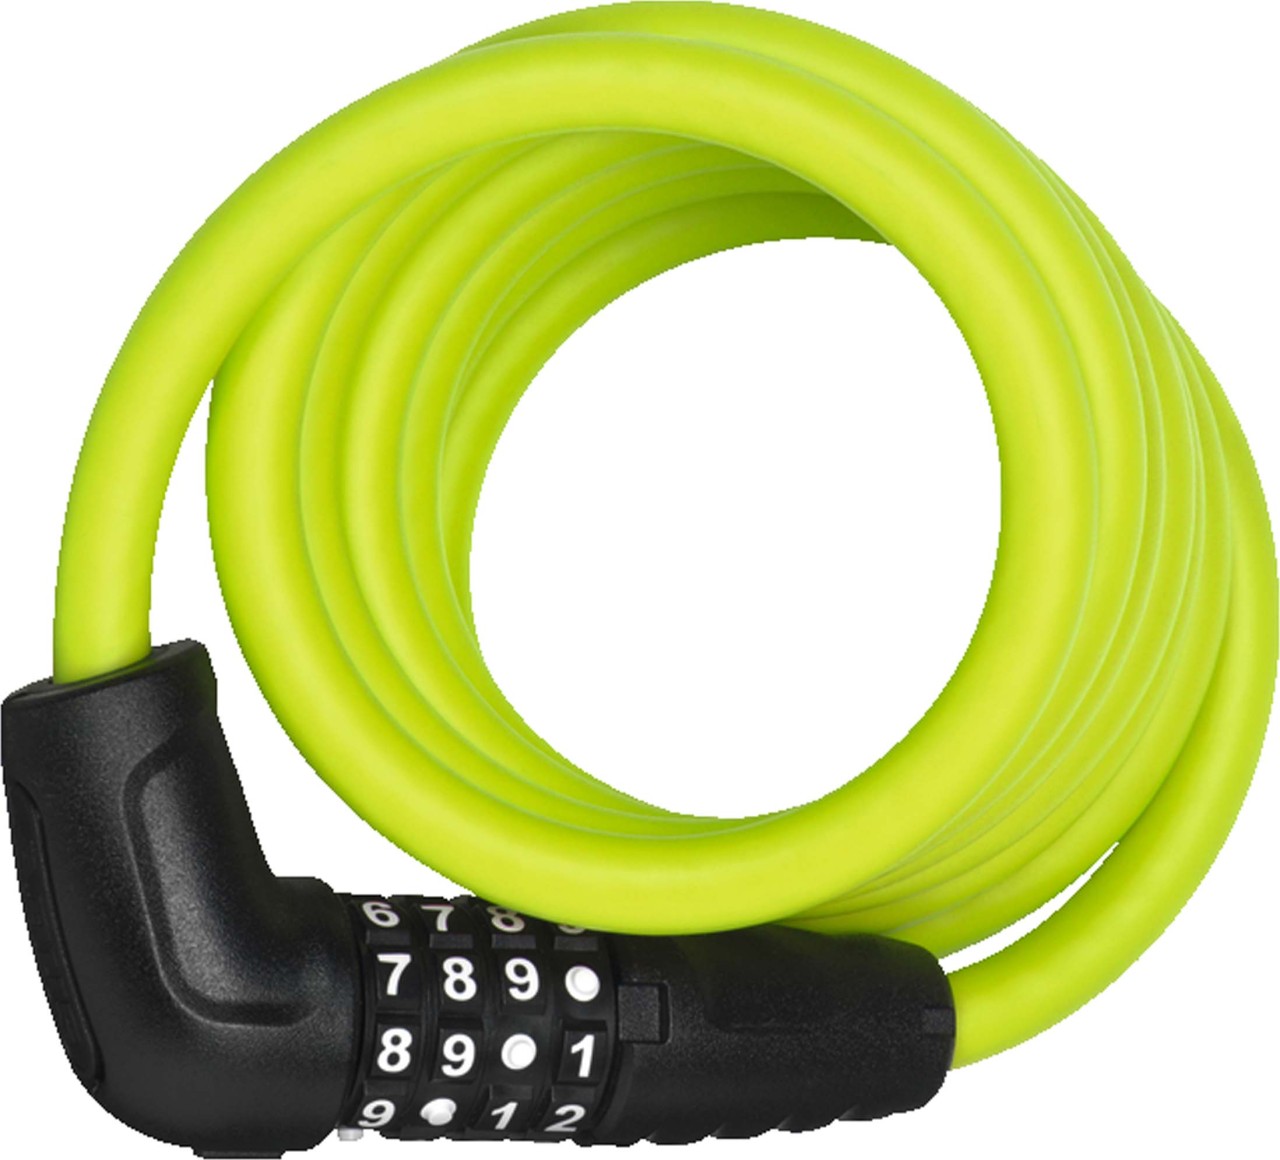 Abus Spiral cable lock NUMERO 5510C/180/10 lime